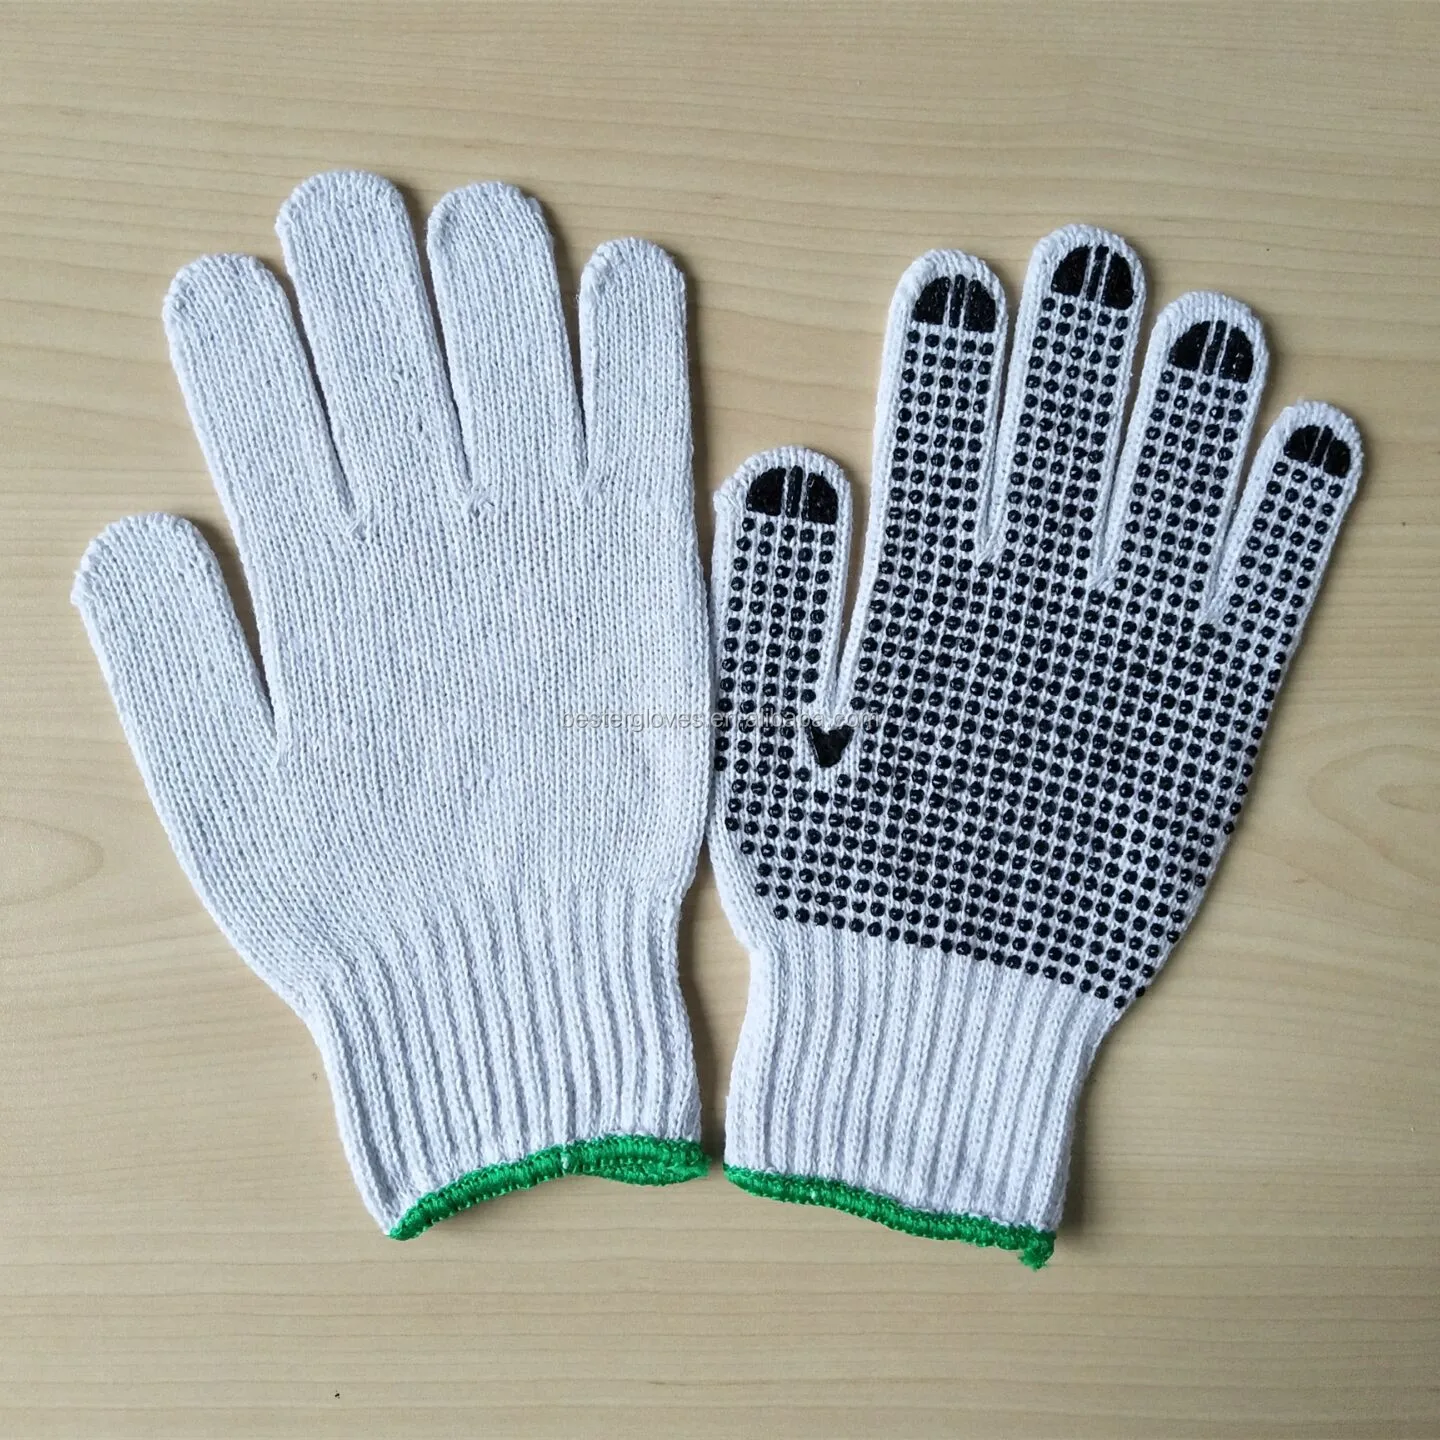 Poly Cotton Knitted Pvc Dotted Gloves 7gauge 550g/dozen Professional ...